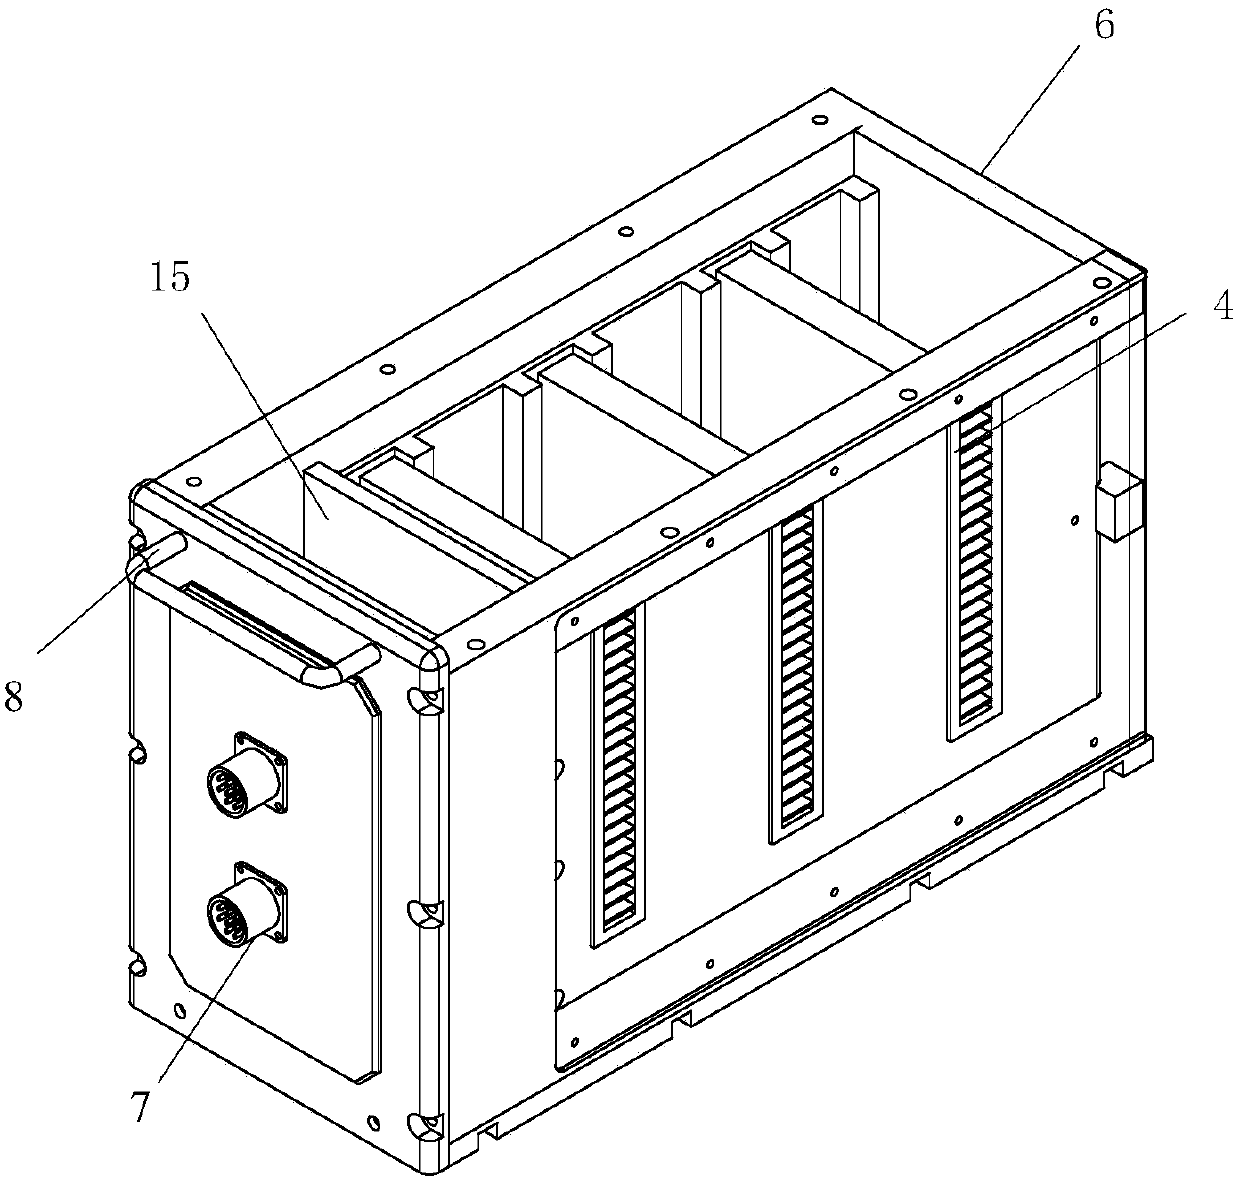 A sealed chassis with multi-module independent cooling air ducts